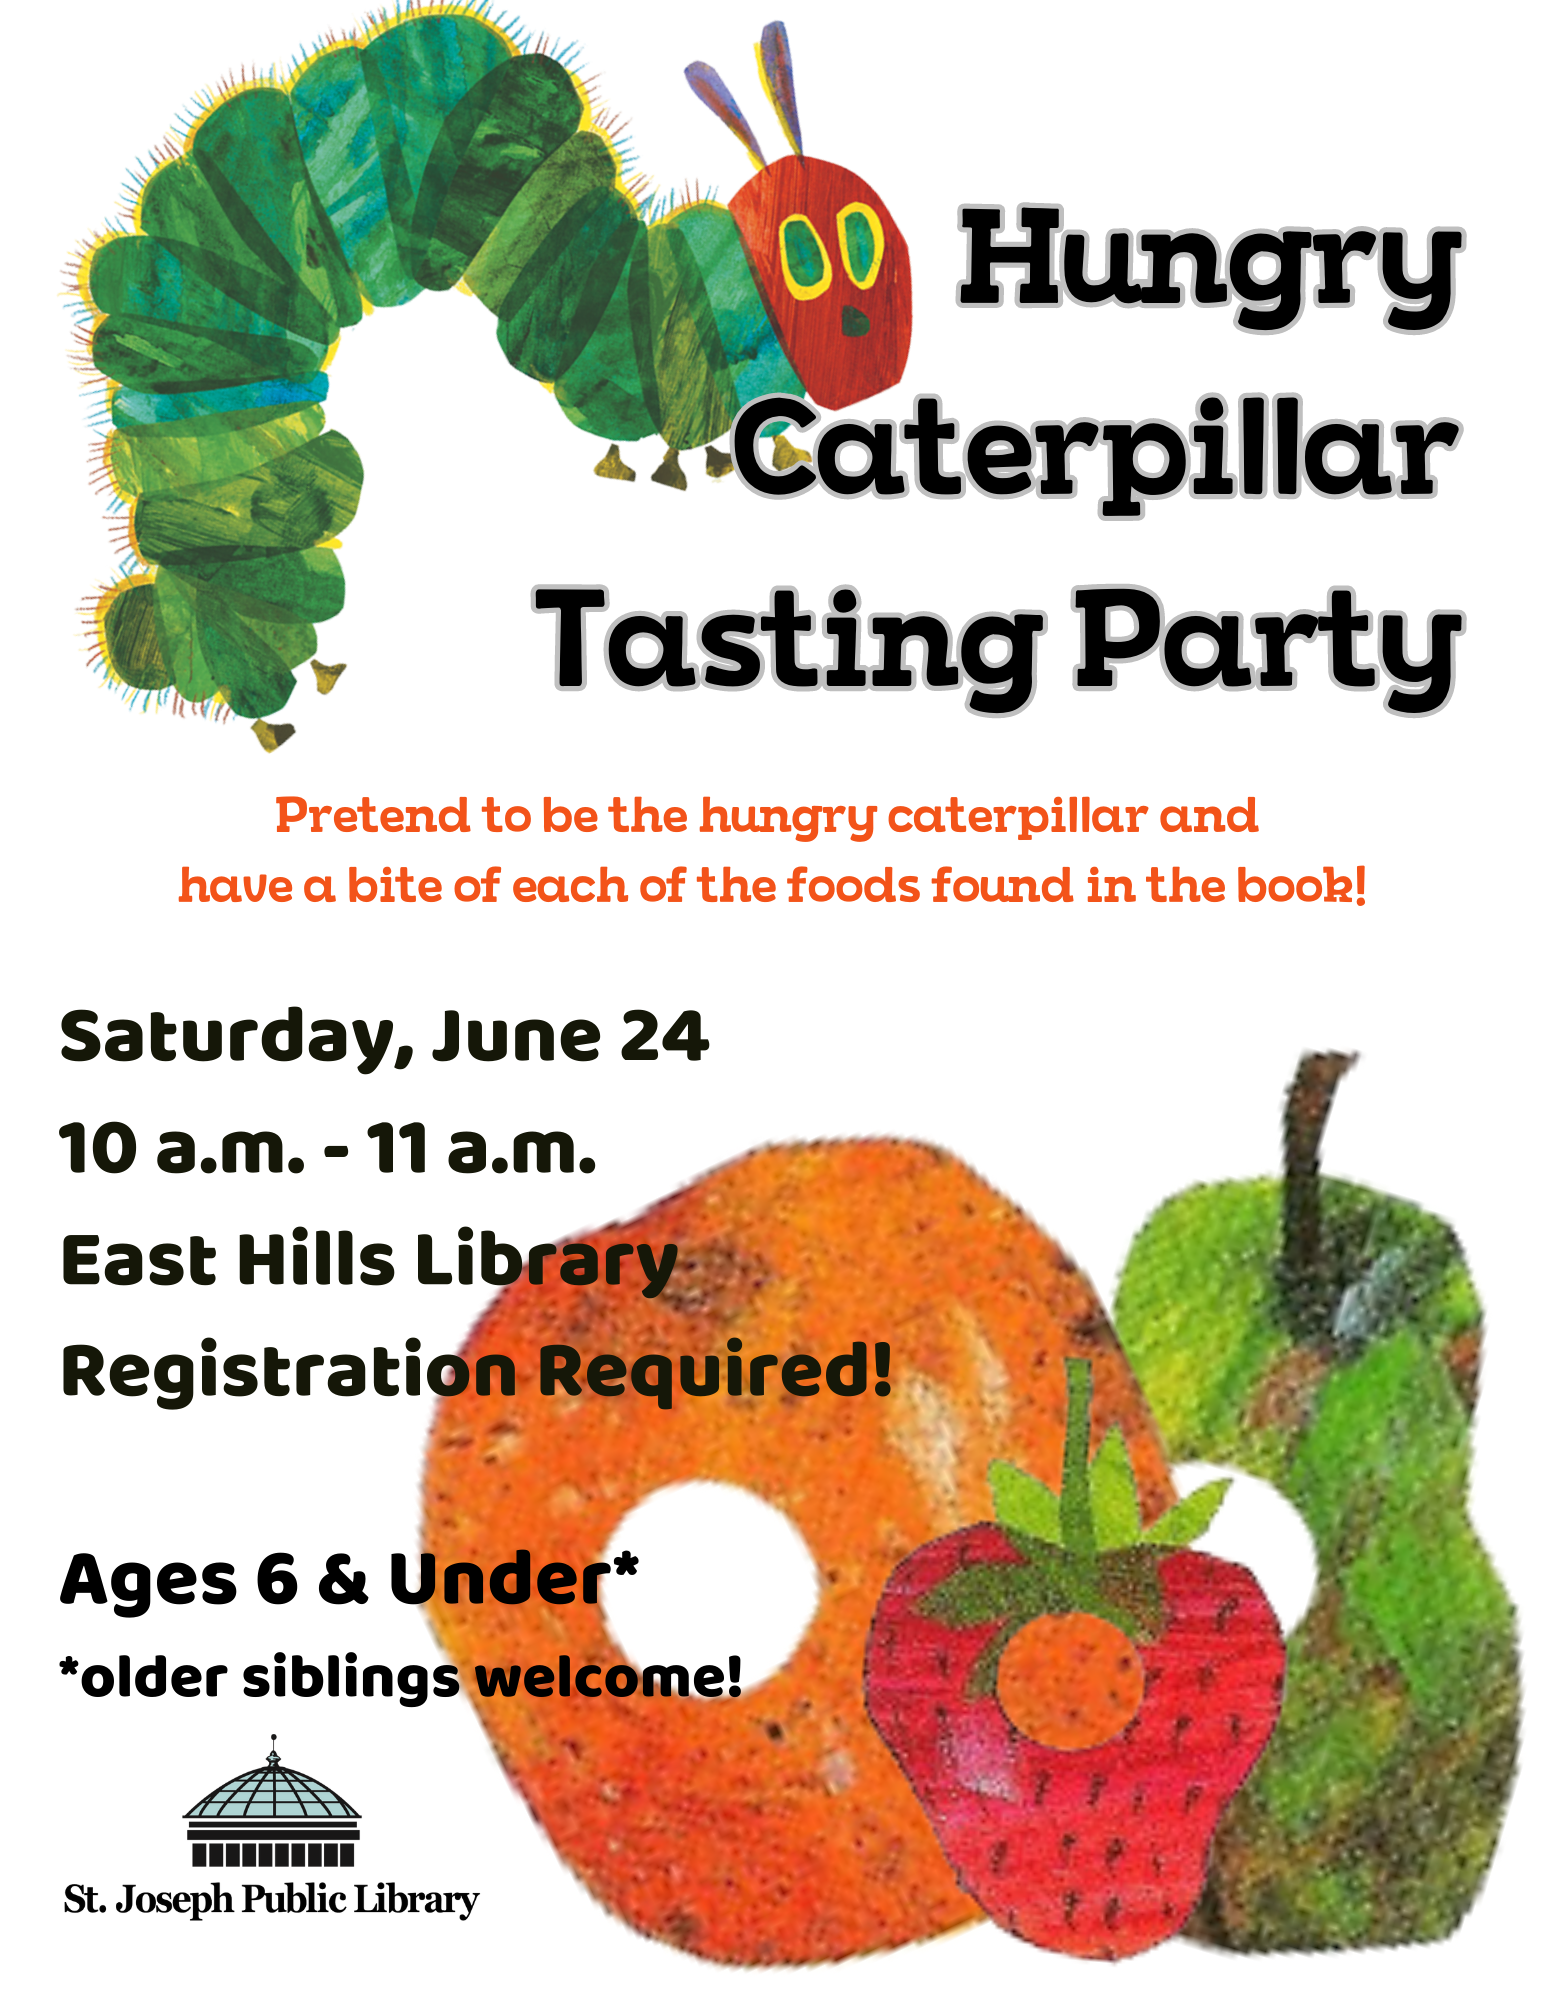 Hungry Caterpillar Tasting Party, East Hills Library, June 24 at 10 a.m. , ages 6 and under